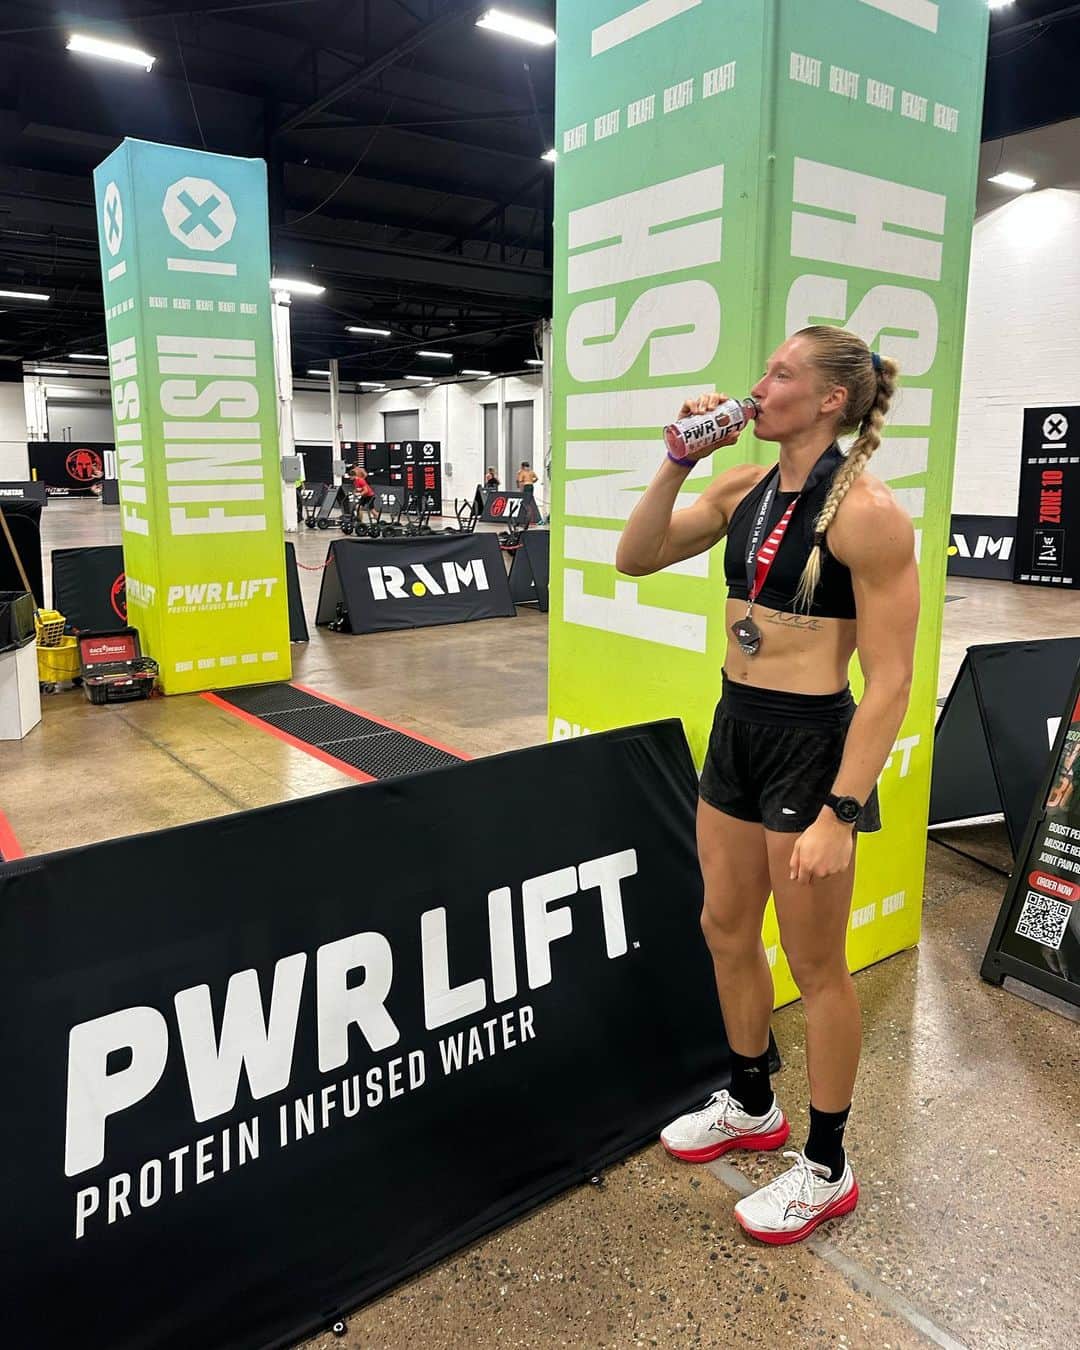 カーリー・ウォパットさんのインスタグラム写真 - (カーリー・ウォパットInstagram)「First Deka Fit! Didn’t die ✔️  Qualified for World Championships ✔️  Drank a @drinkpwrlift ✔️ Or 3.. Ran up the “Rocky steps” ✔️   That means.. the @deka.fit World Championship trifecta has been achieved! 🔥 After yesterday’s Northeast Deka Fit performance, I have officially qualified for all three World Championship races in December (top 20 qualify). That’s where the real battles will go down! ⚔️  Current rankings: 1st in Deka Strong - 11:55 (WR)  6th in Deka Mile - 20:30 13th in Deka Fit - 35:41  Each race consists of 10 functional fitness zones. The Strong is just the zones, the Mile includes 1 mile of running, and the Fit includes 5k.   Happy with my performance, and grateful that I got to toe the line with such a stacked field of ladies! 💪🏼 I always love the hype of a heated competition. And the element of racing head to head fires me up.   Going in to this, I built a solid game plan with  @geigercoaching. I played my pacing a little conservative, which allowed me to hit the assault bike HARD for a top zone time of 1:27. From then on, I was able to pick up the pace, and pass up some competitors to finish 7th in my heat. It took patience to run my own race, but holding back until it was my time to step on the gas pedal payed off. Executed the game plan! And now we have the info to modify it.   Overall, Deka Fit is a race largely dominated by running. Strength and zone work are in my wheelhouse, so the area where I can make the most improvement is still running.  I’ve been training to build my running & endurance for 4 months now. Lots of progress made! More to come.   Thank you @yancyculp, judges, volunteers, and all others who helped run the event! See you all in December.」8月28日 13時23分 - carlywopat